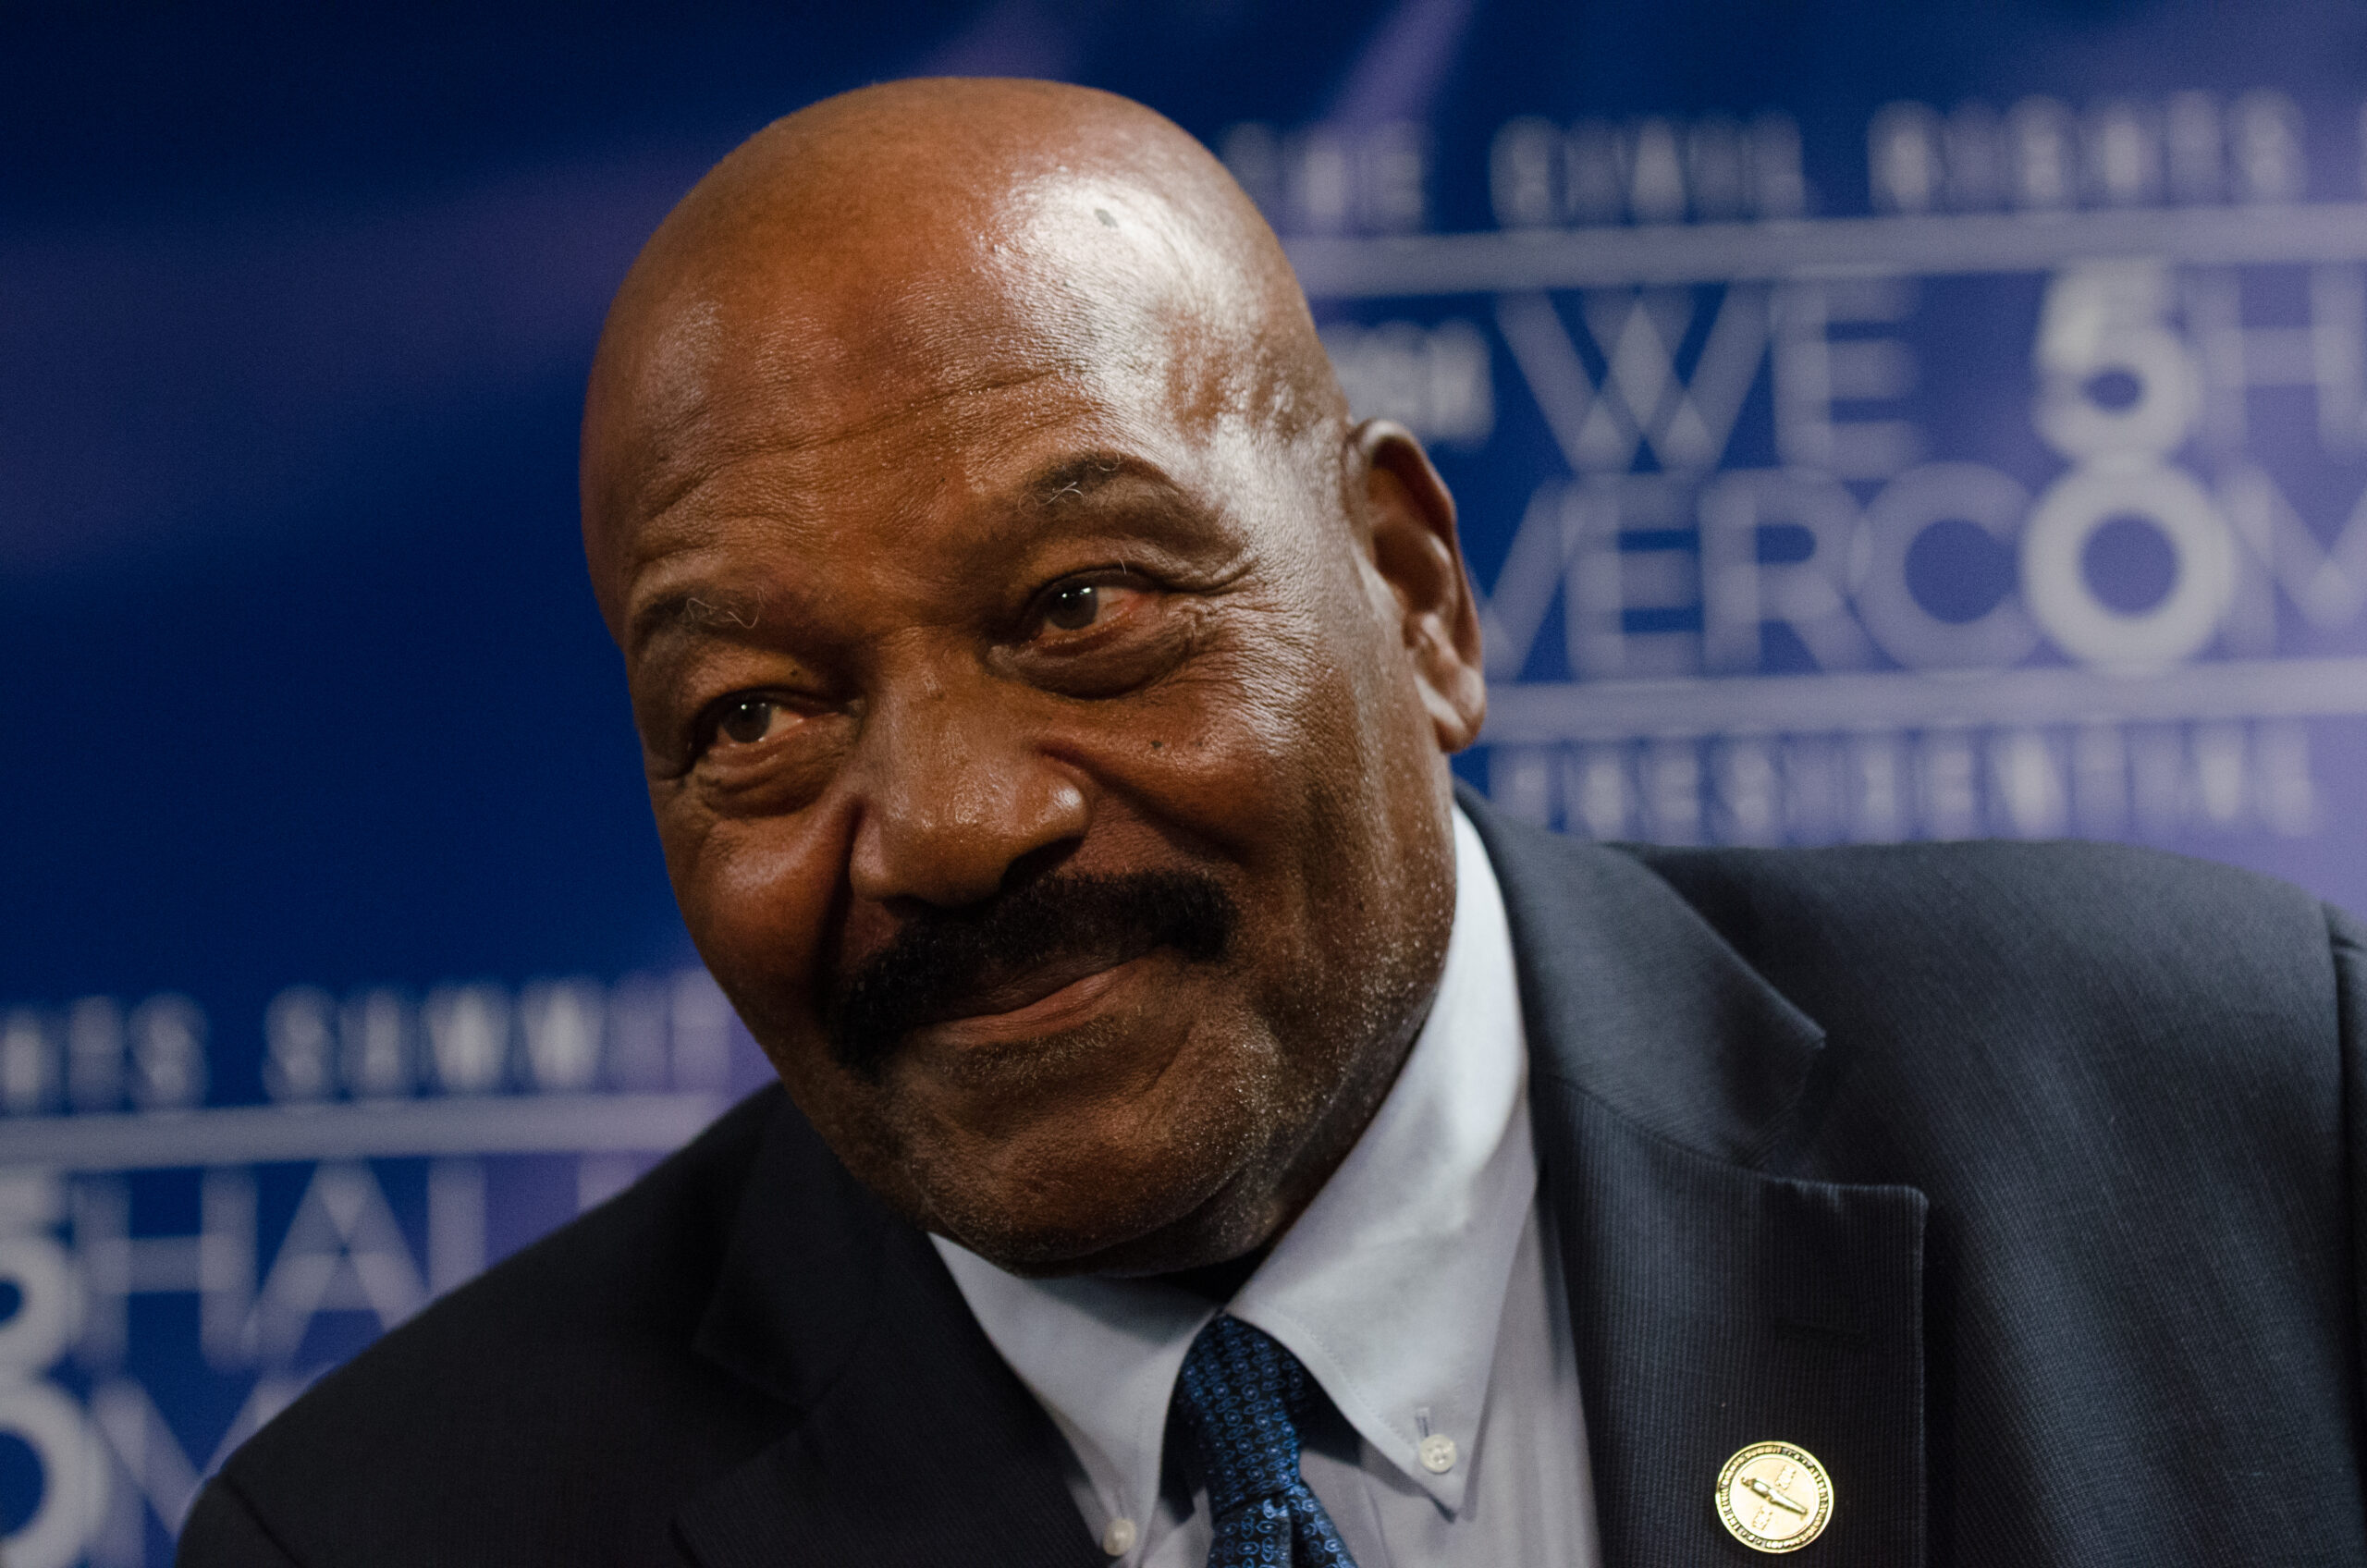 NFL legend and civil rights advocate Jim Brown dies at 87